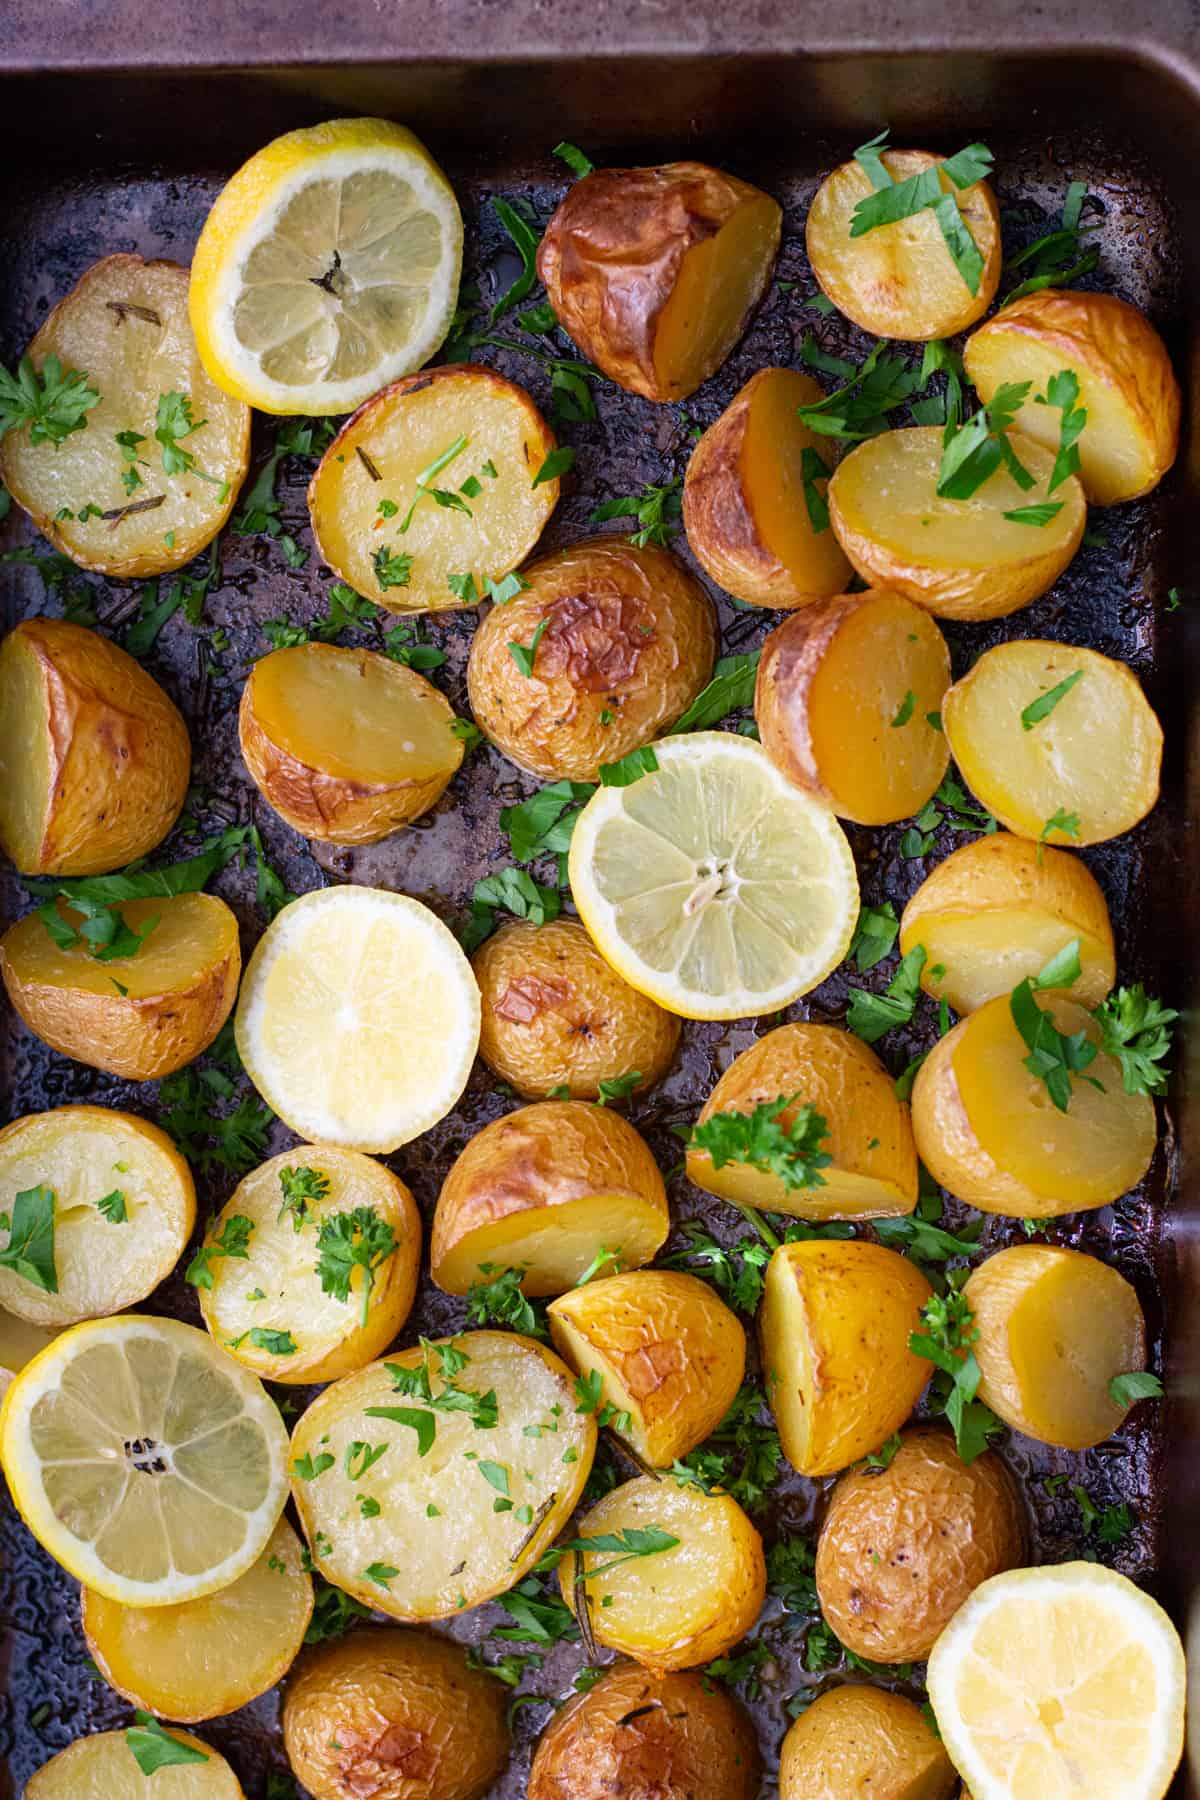 Greek style potatoes are roasted in the oven and served with lemons